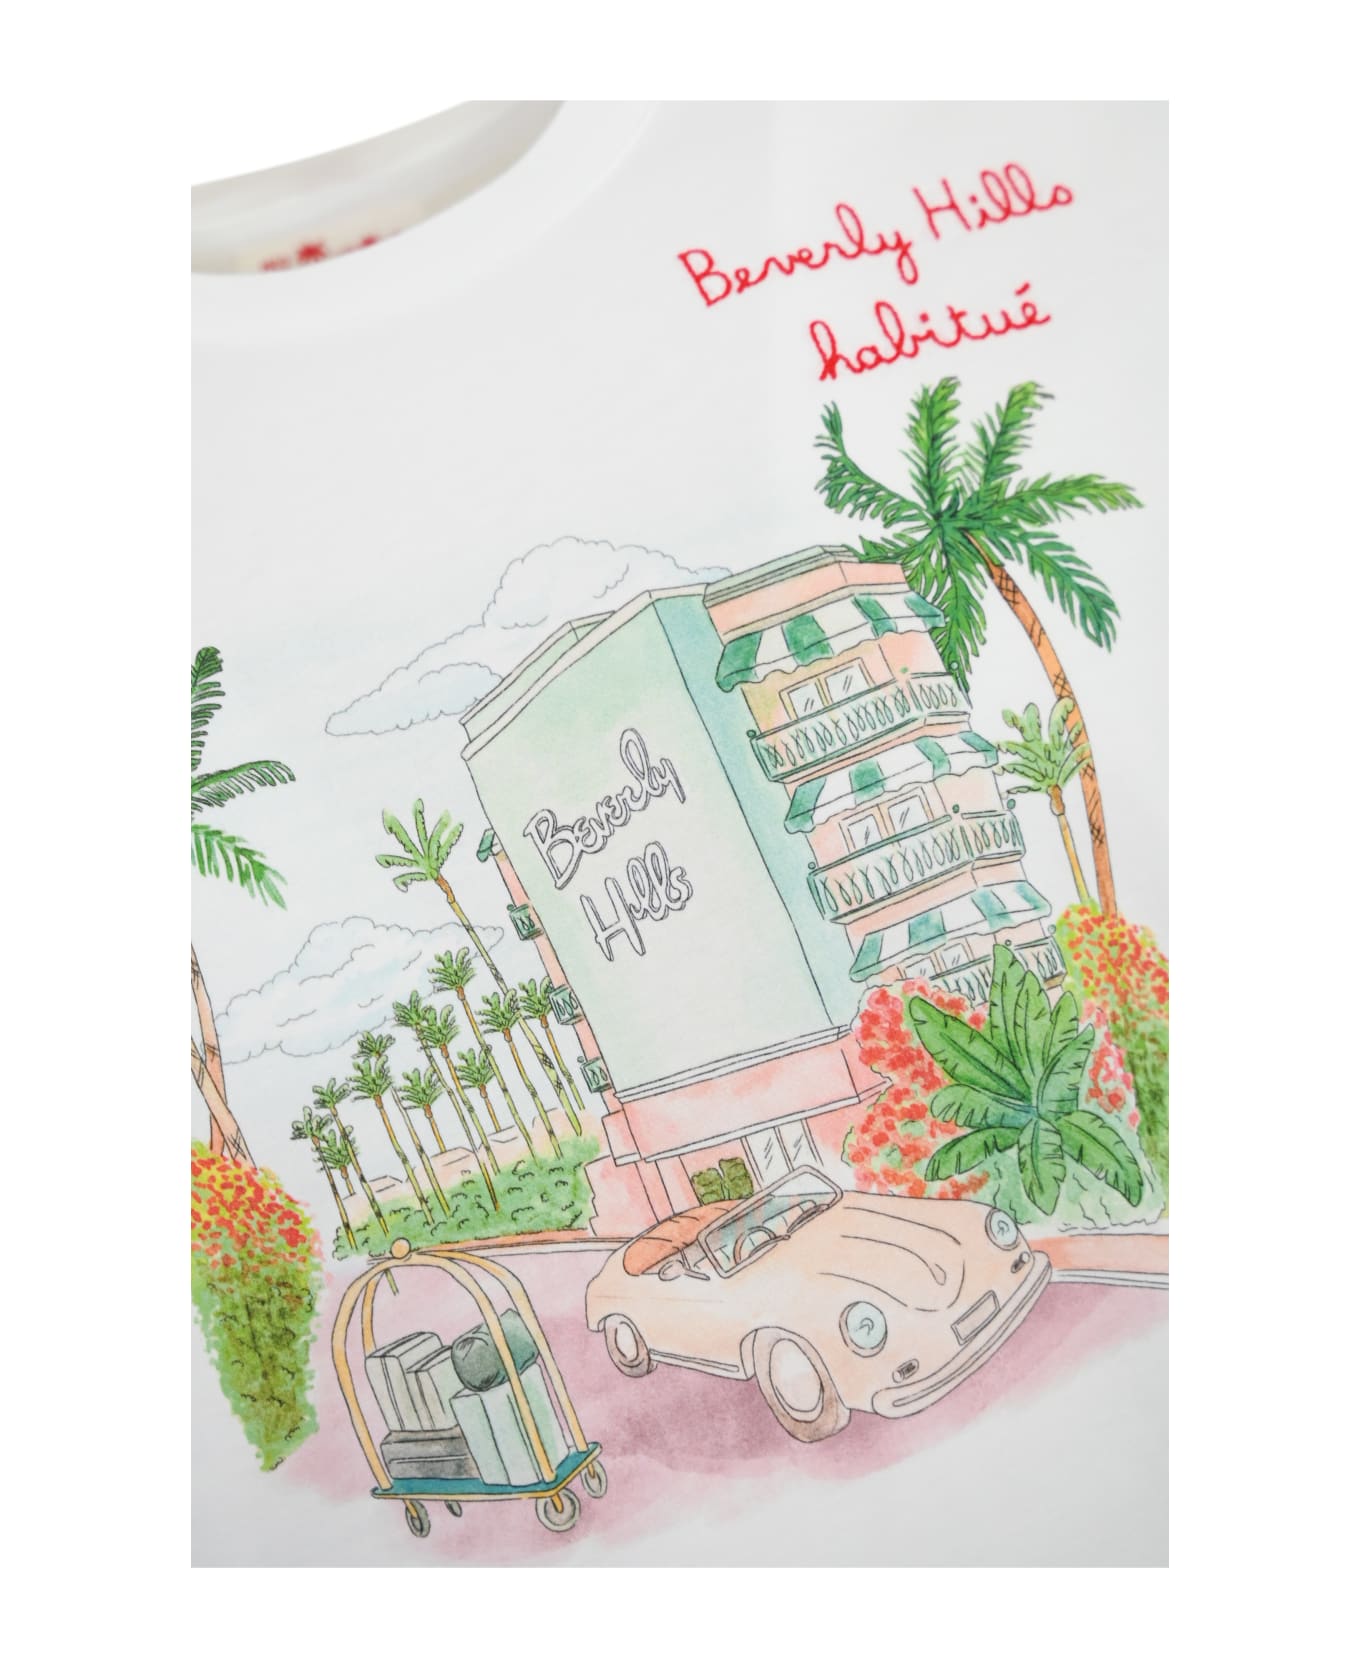 MC2 Saint Barth T-shirt With "beverly Hills Habitue" Embroidery - Bianco シャツ